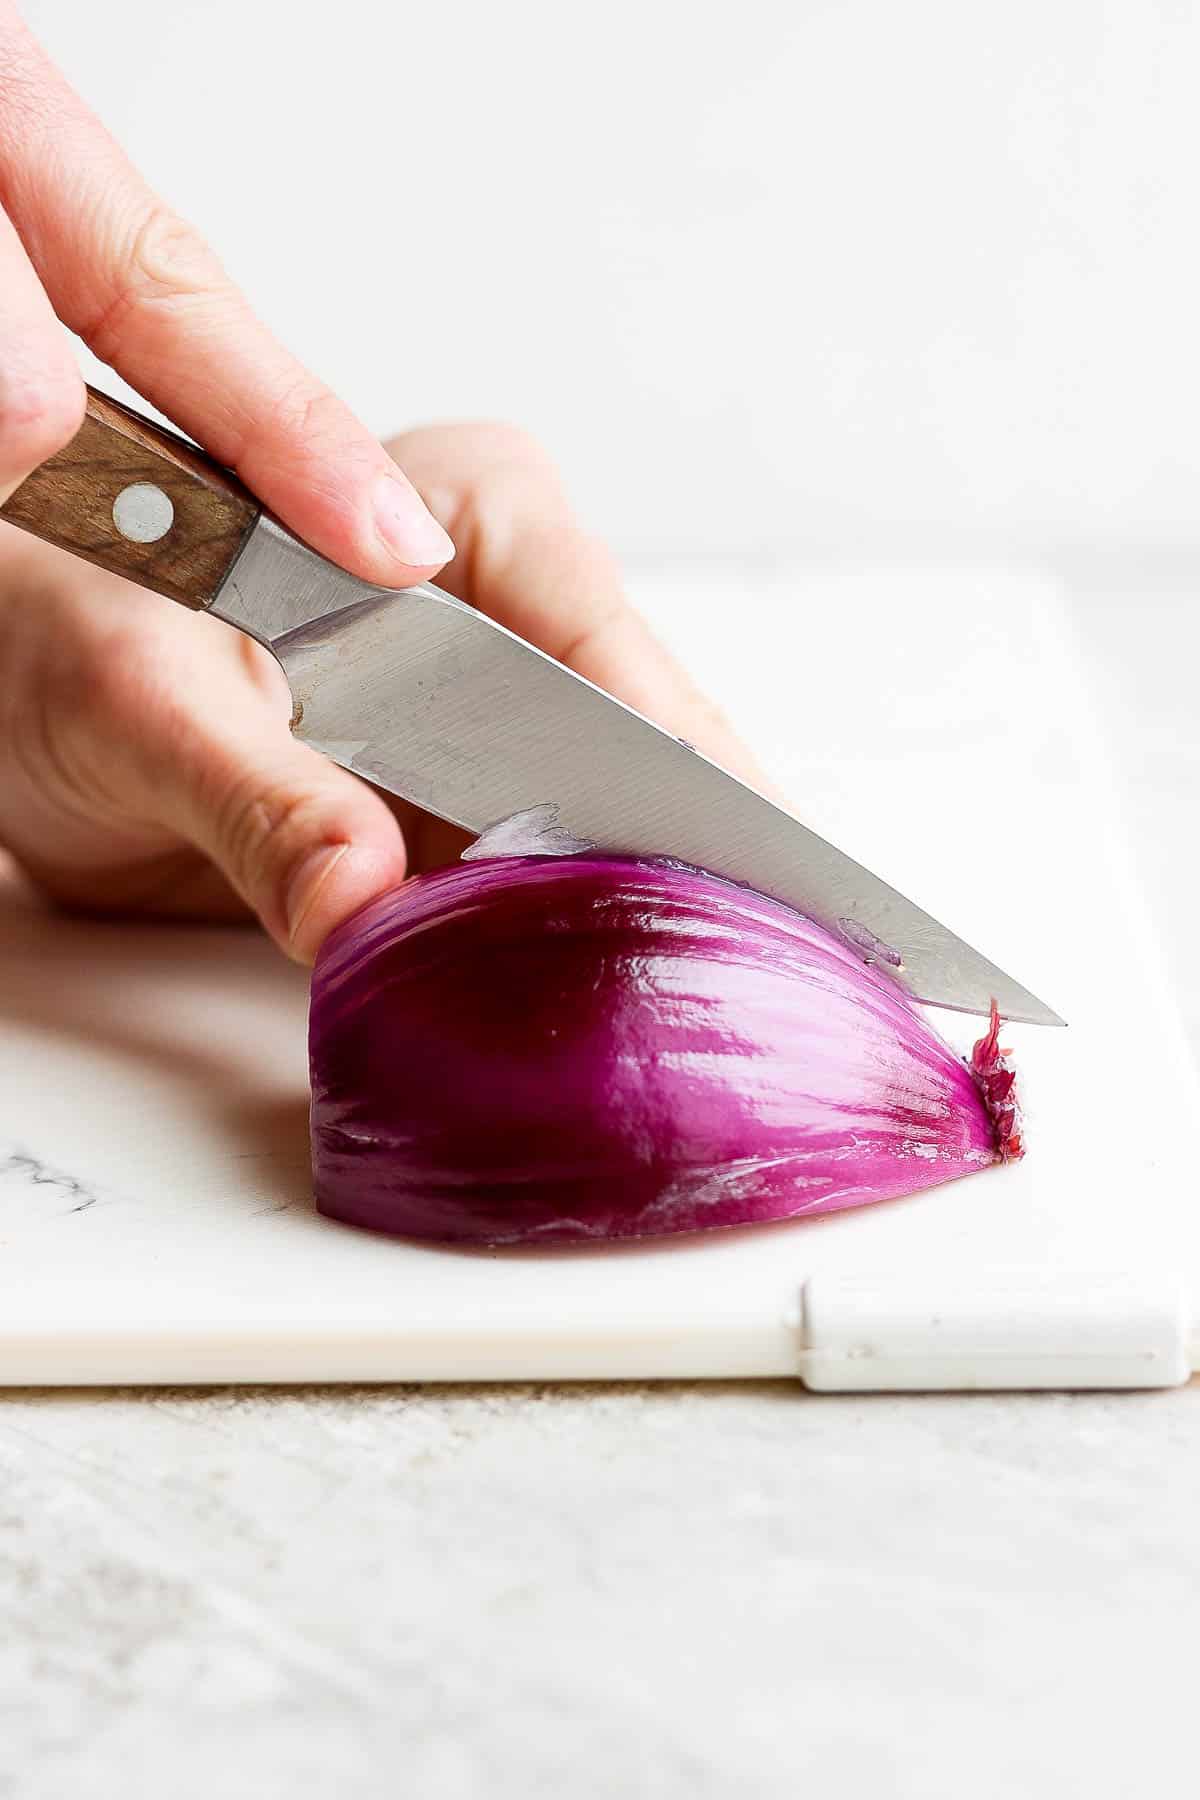 Half of a red onion being cut in half again.